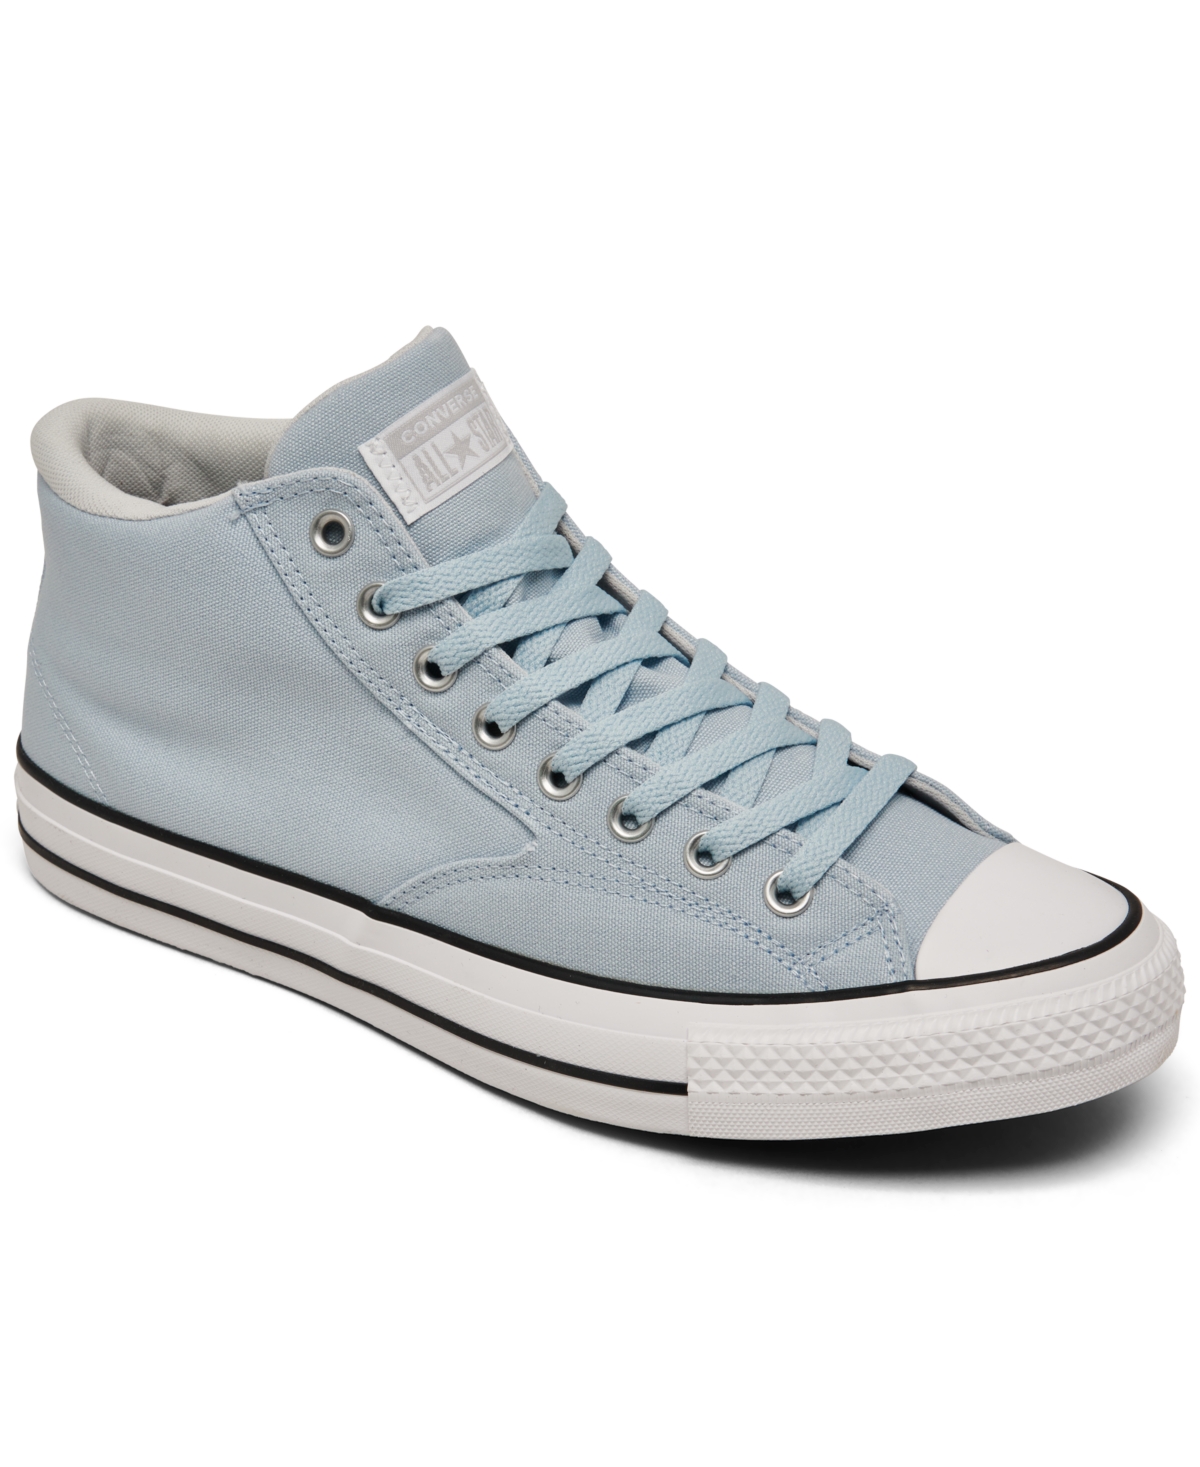 Men's Chuck Taylor All Star Malden Street Casual Sneakers from Finish Line - Cloudy Daze Blue/Fossil